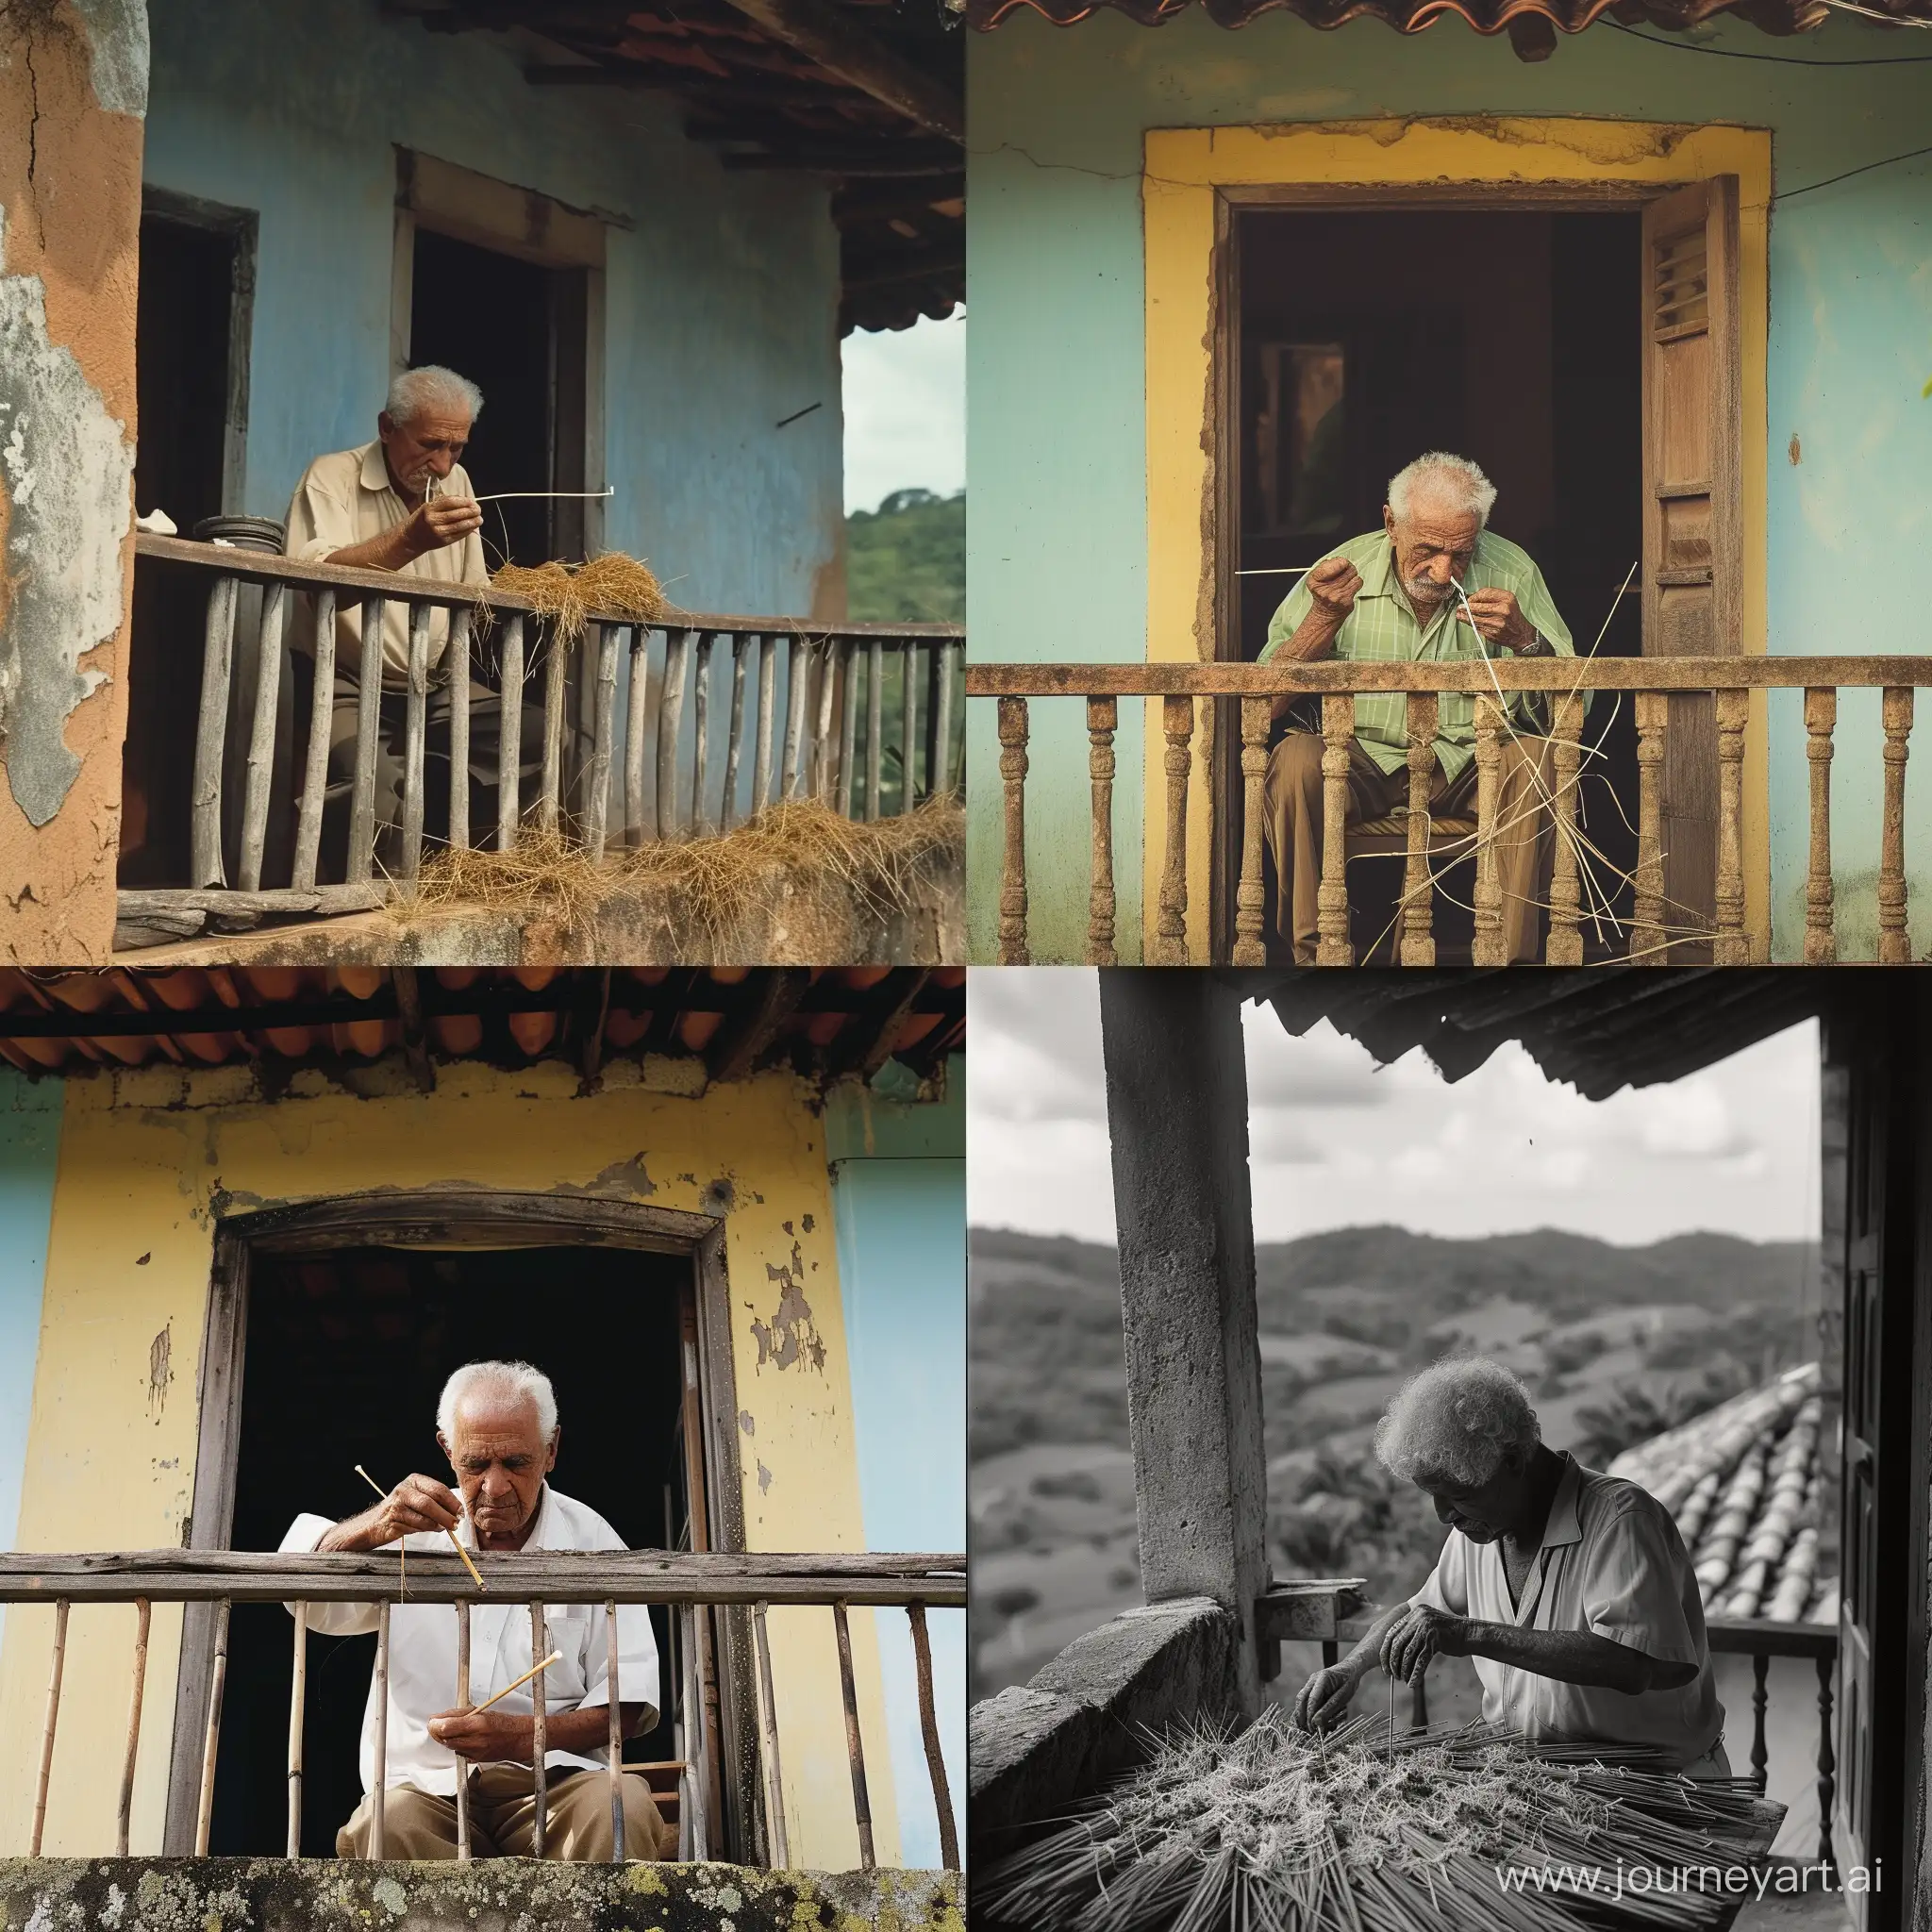 an elderly man making a straw cigarette on the balcony of a small country house in the interior of Minas Gerais